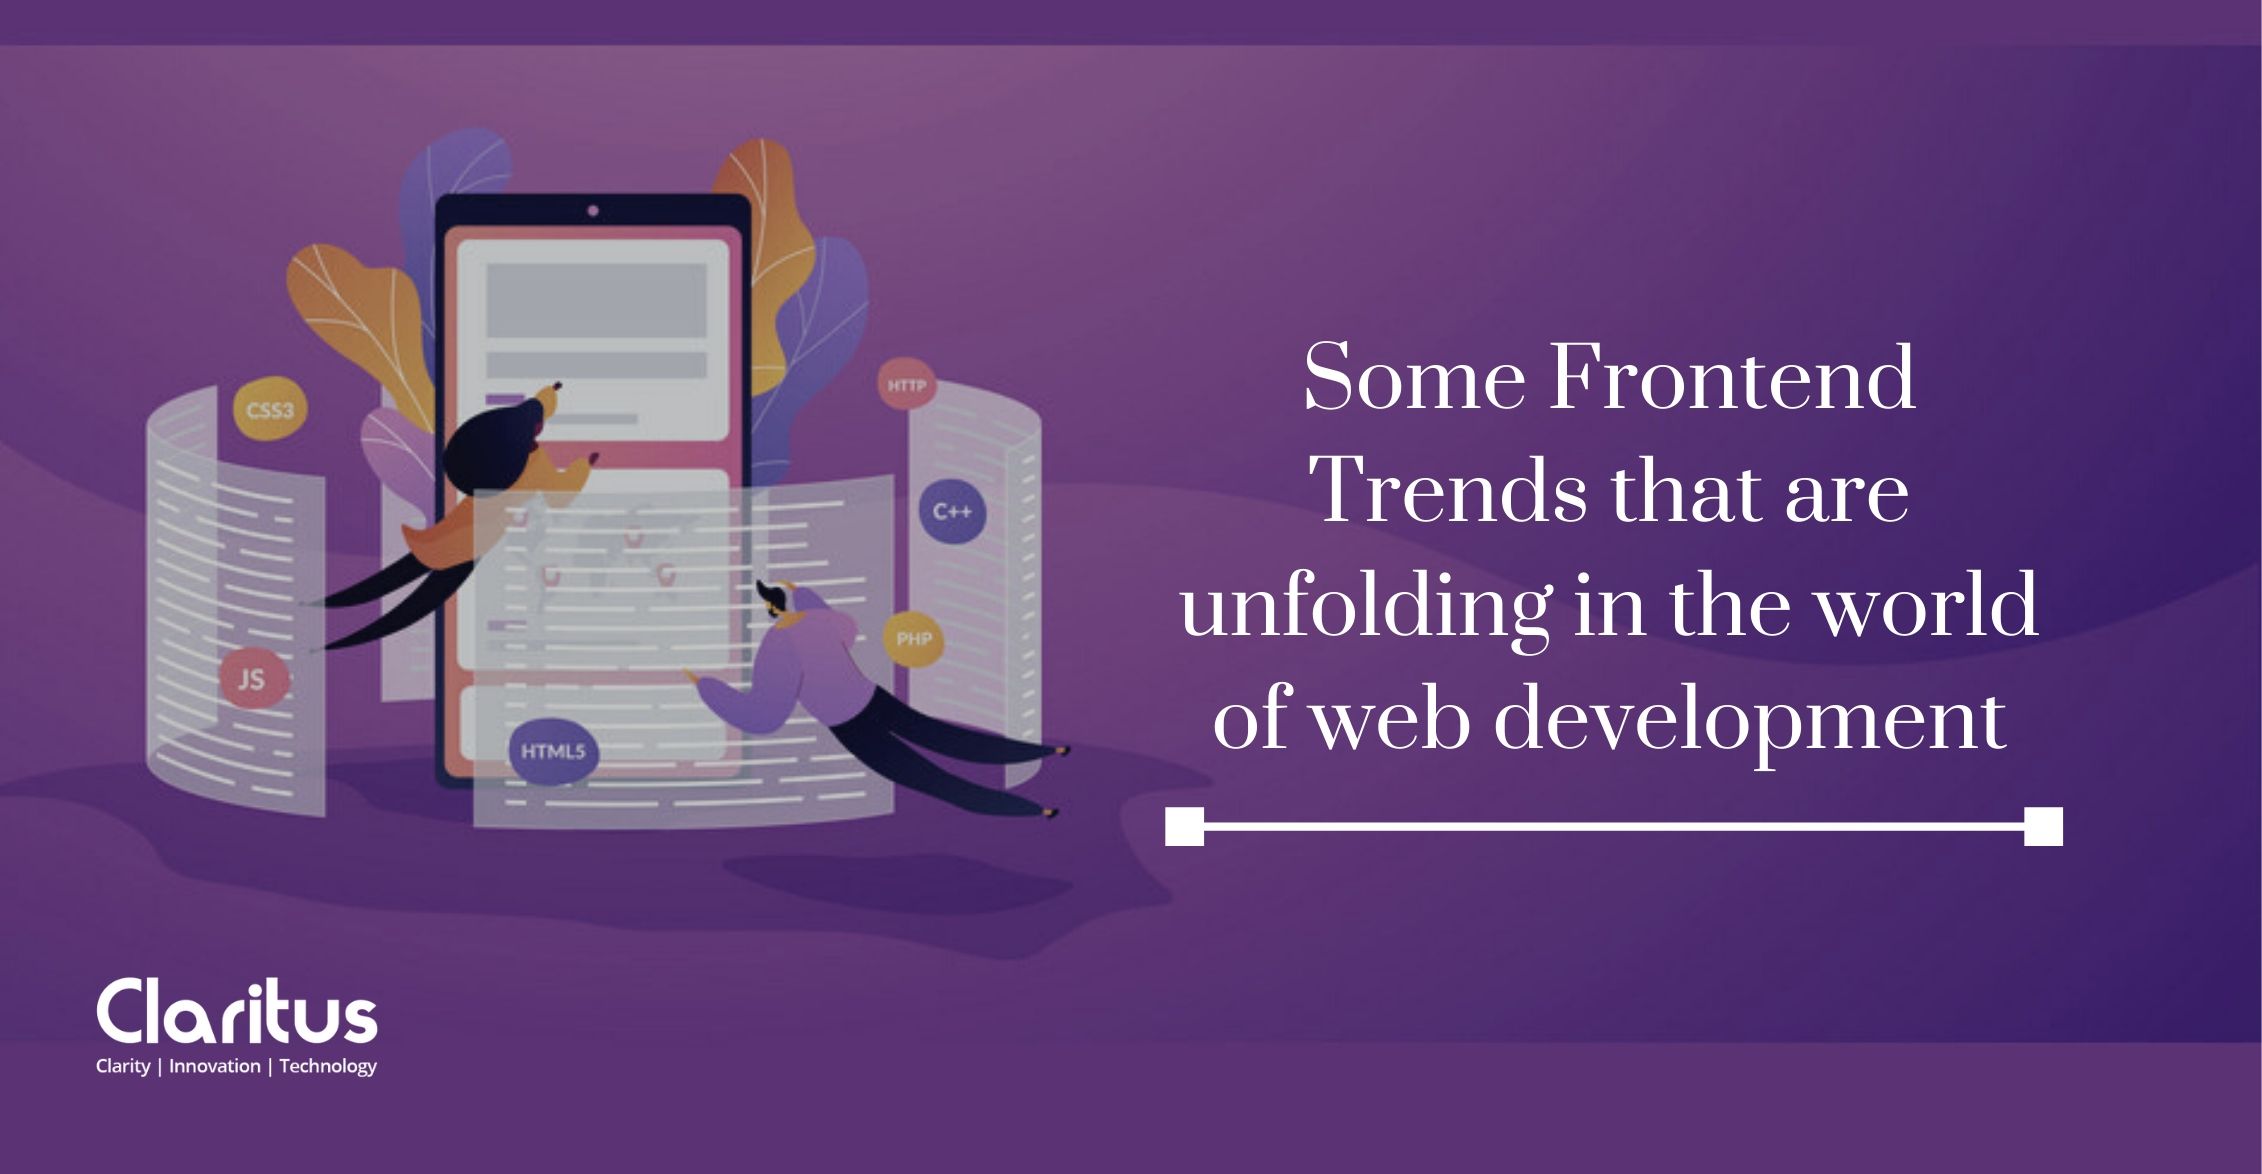 Copy of Some frontend trends that are unfolding in the world of web development